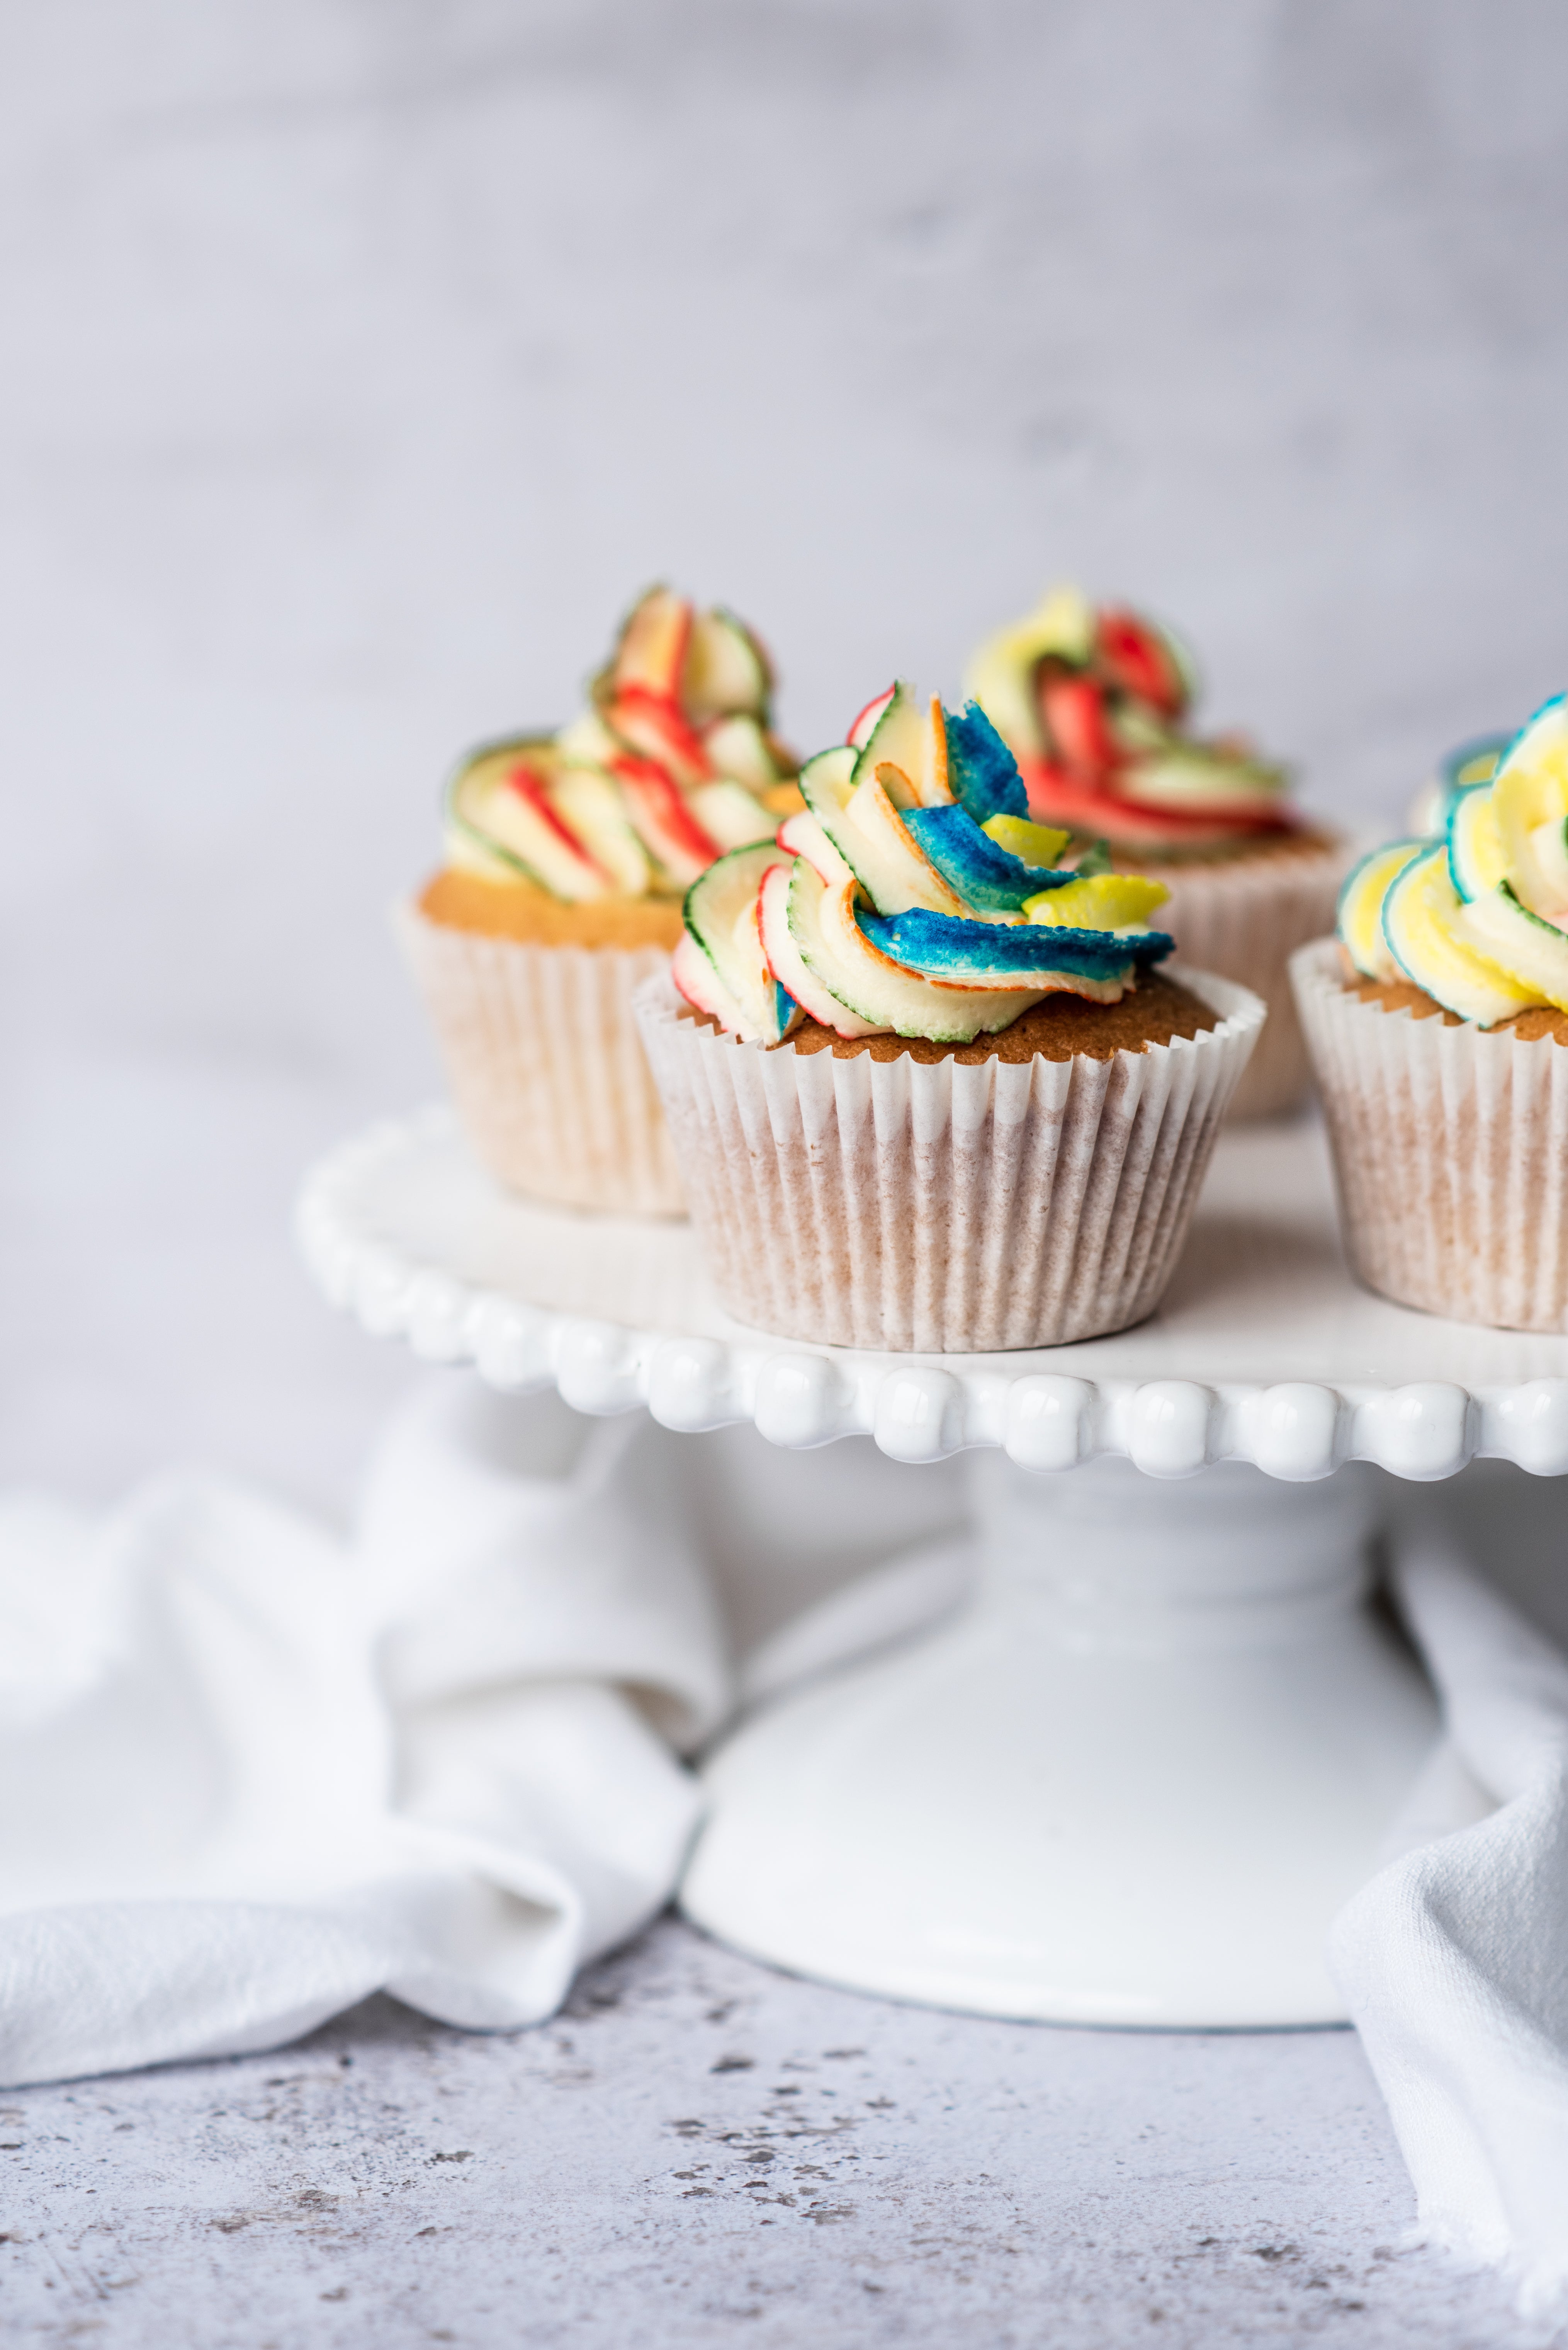 An easy fairy cake recipe that is ready in under 20 minutes!